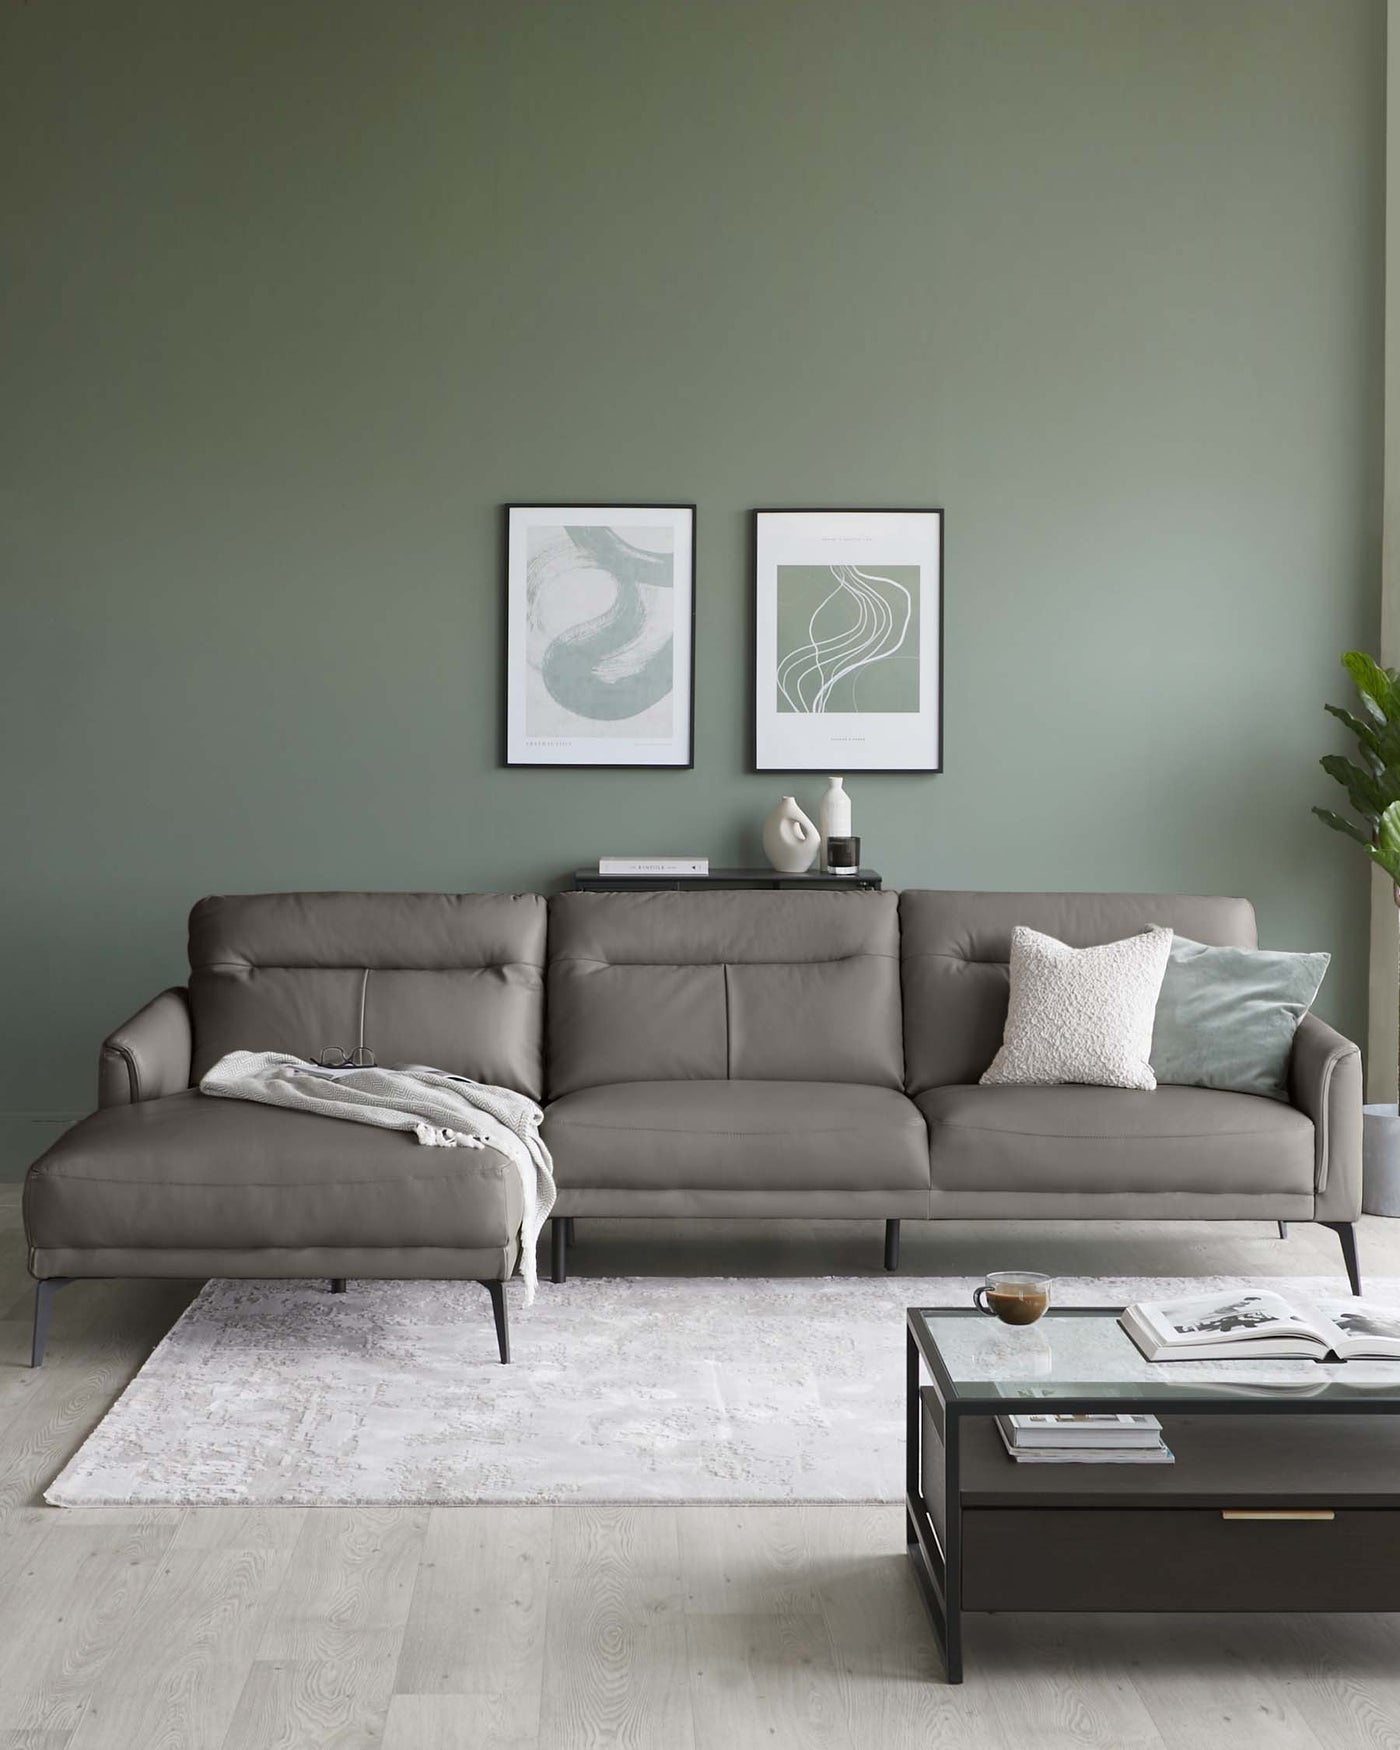 Modern L-shaped sectional sofa in a muted grey tone with clean lines and minimalistic metal legs, complemented by a sleek, rectangular black coffee table with a clear glass top and open shelf storage. A soft white area rug with a subtle pattern lies beneath the furniture ensemble.